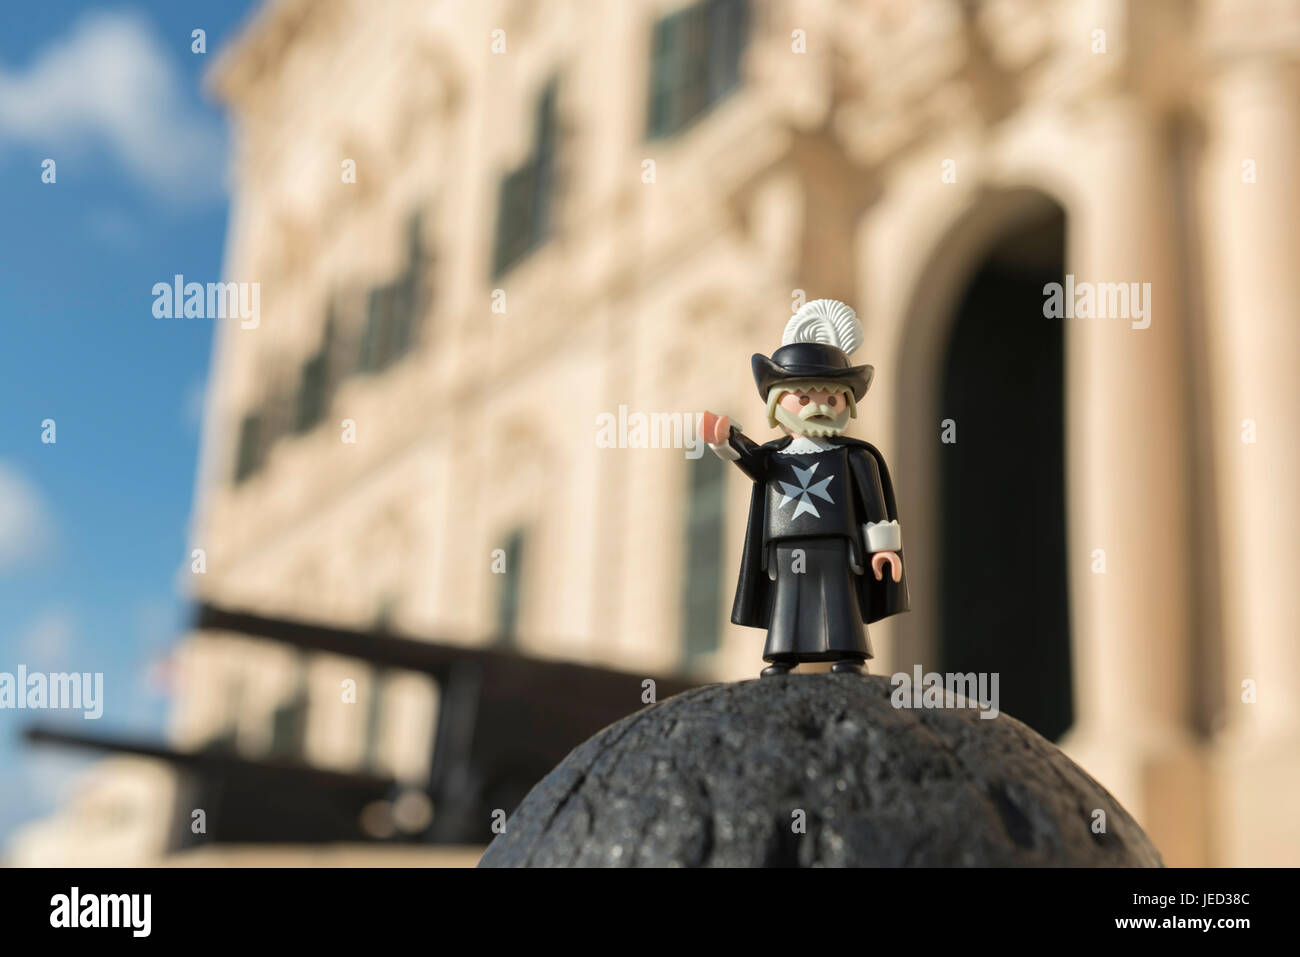 Valletta, Malta - October 11, 2016: Playmobil maltese knight with the Auberge de Castille in the background. Playmobil are famous construction toys ma Stock Photo